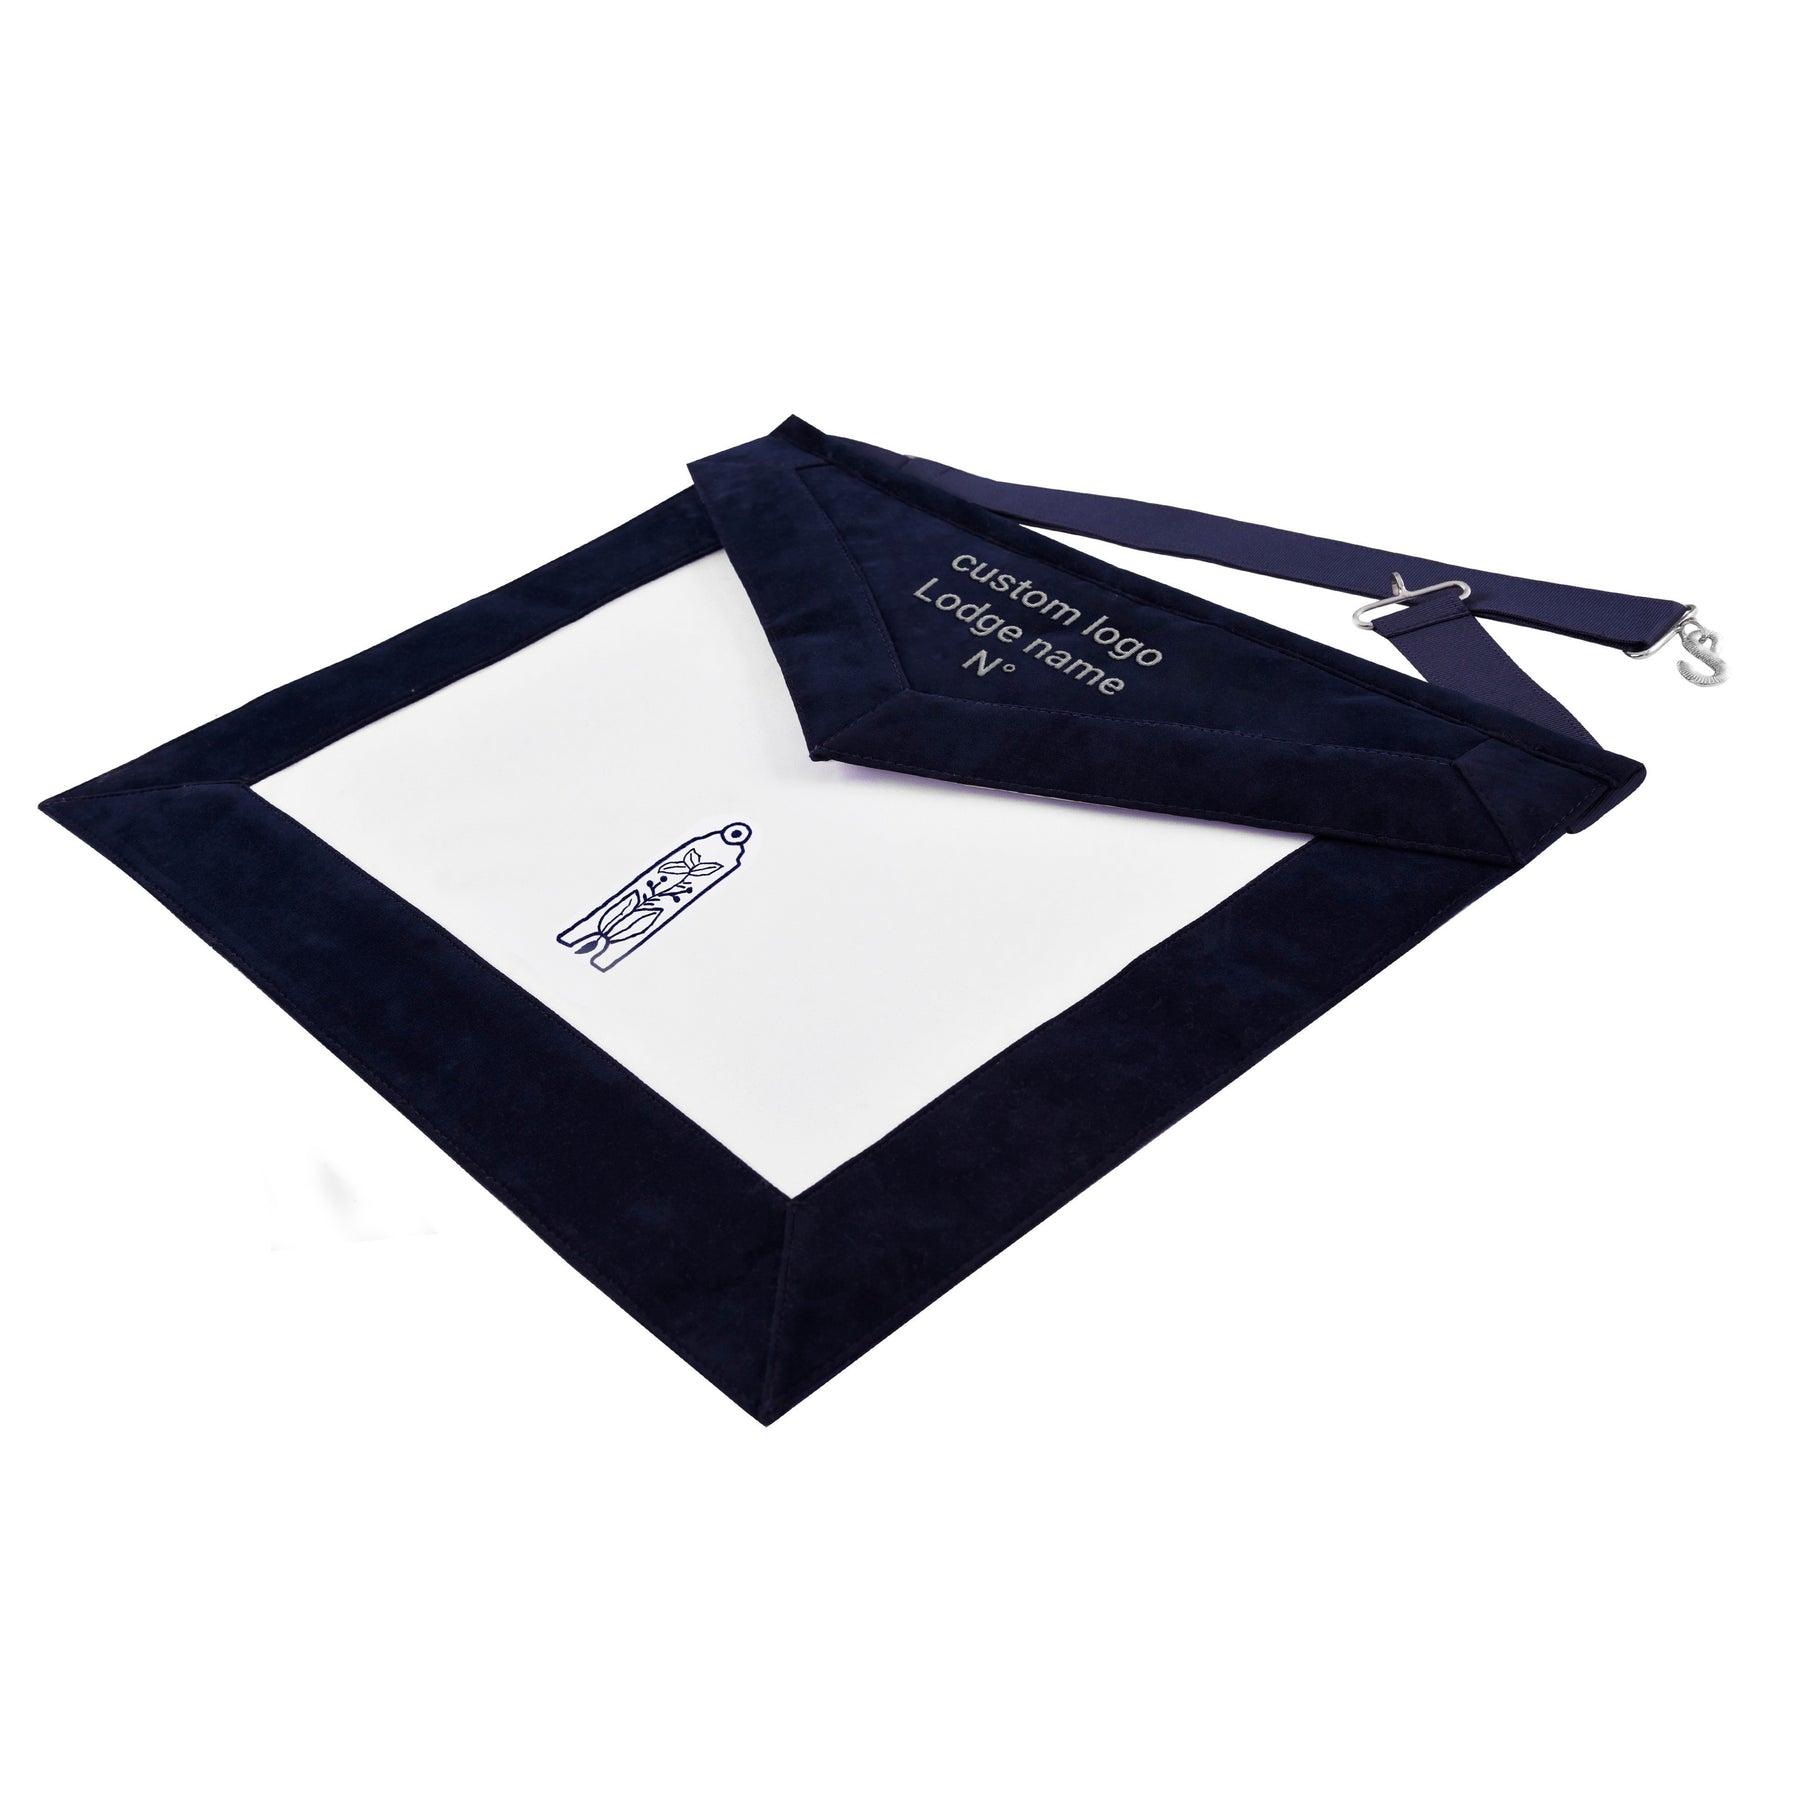 Junior Warden Blue Lodge Officer Apron -  Navy Velvet With Silver Embroidery Thread